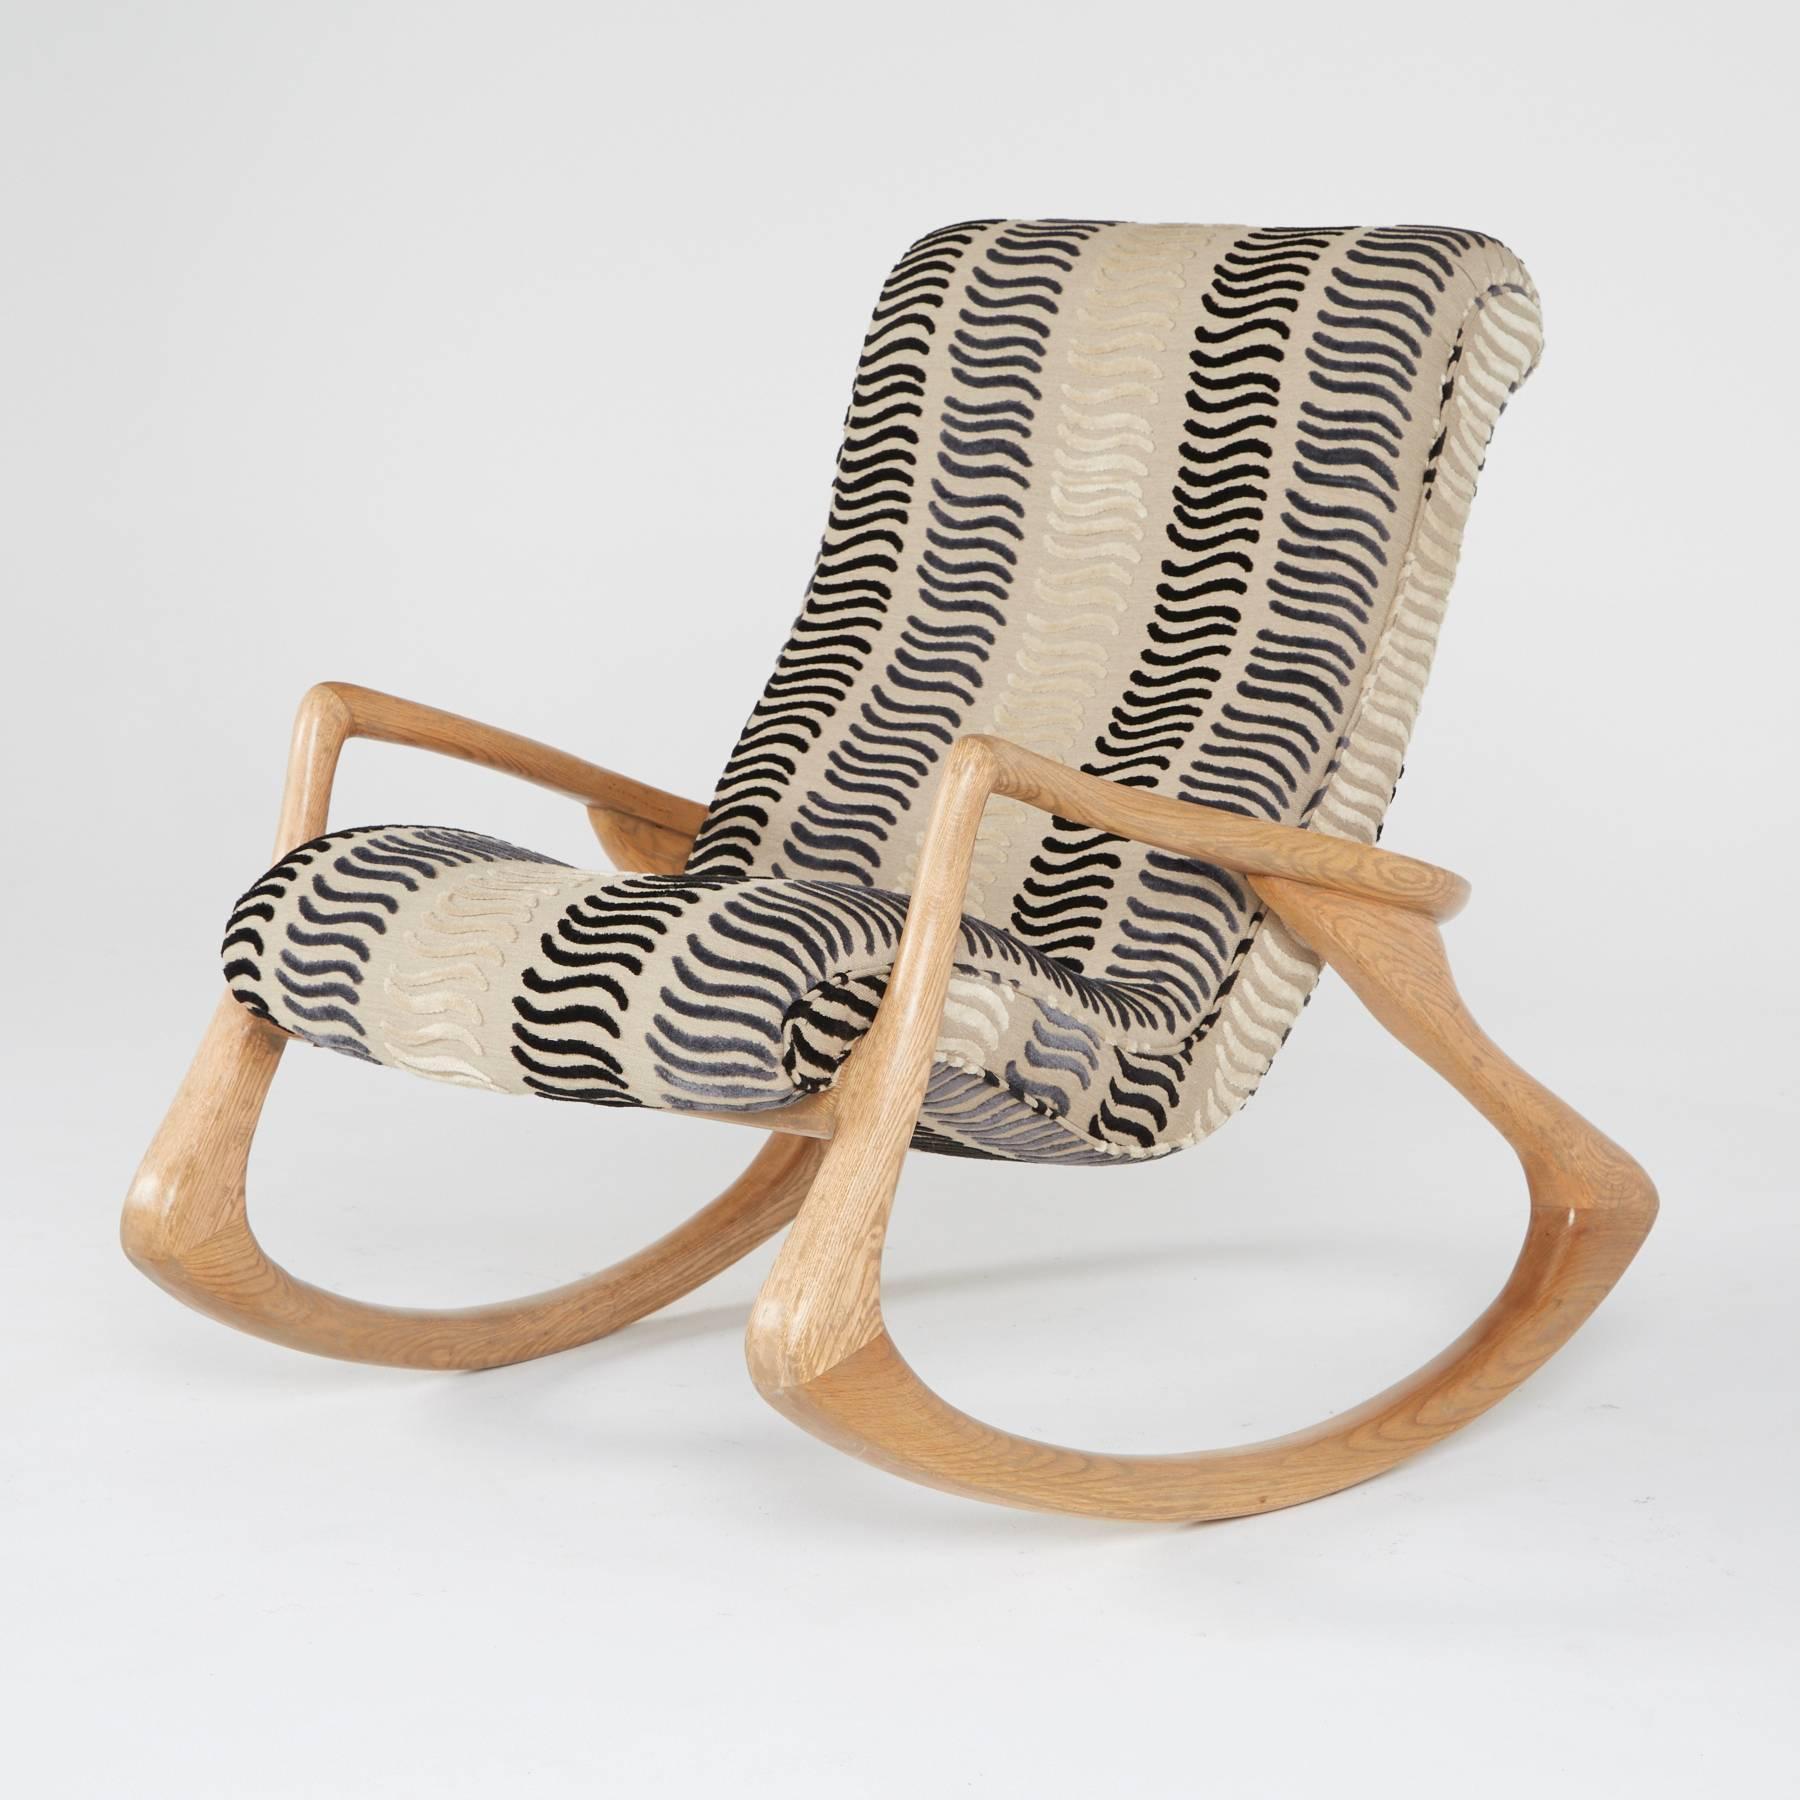 A very rare example in oak, this Vladimir Kagan contour rocker is as collectible as it is beautiful and a fine choice as an investment for collectors and an heirloom for generations. 

Lounge with a book, soak in a view, watch your favorite show.